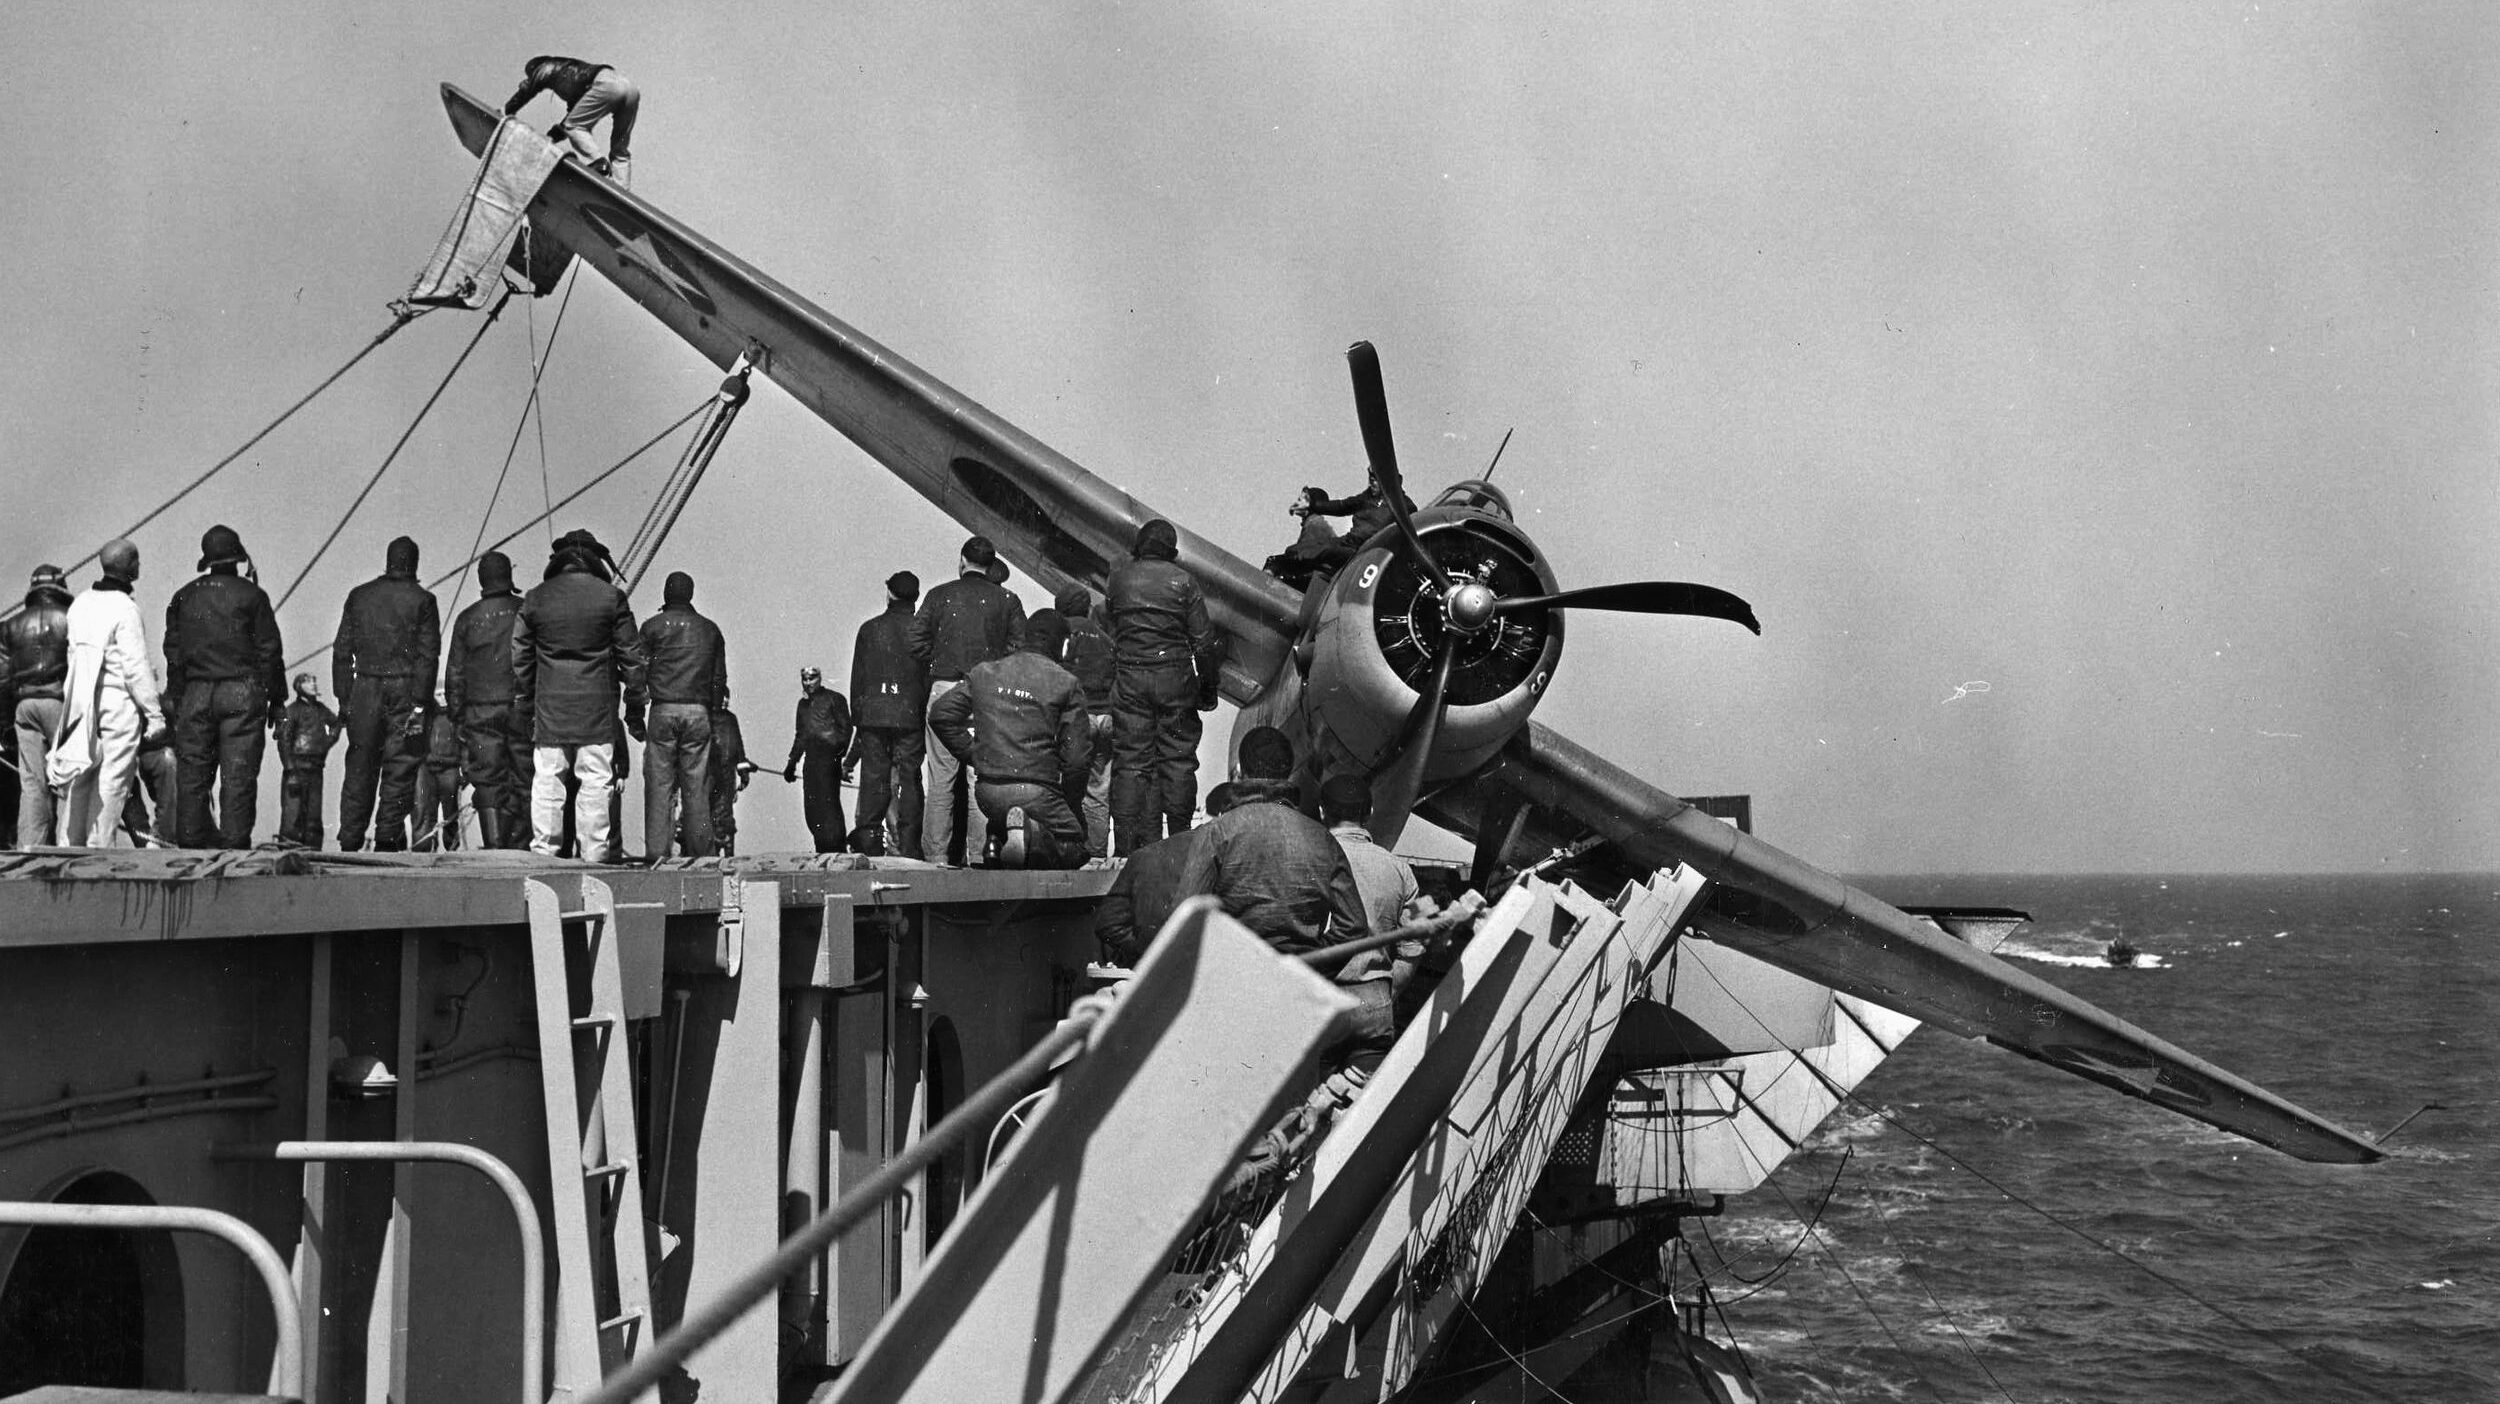 Using winches and a sling, Navy deck hands upright a TBF Avenger torpedo bomber that crashed on landing. The bent propeller attests to a harsh landing.